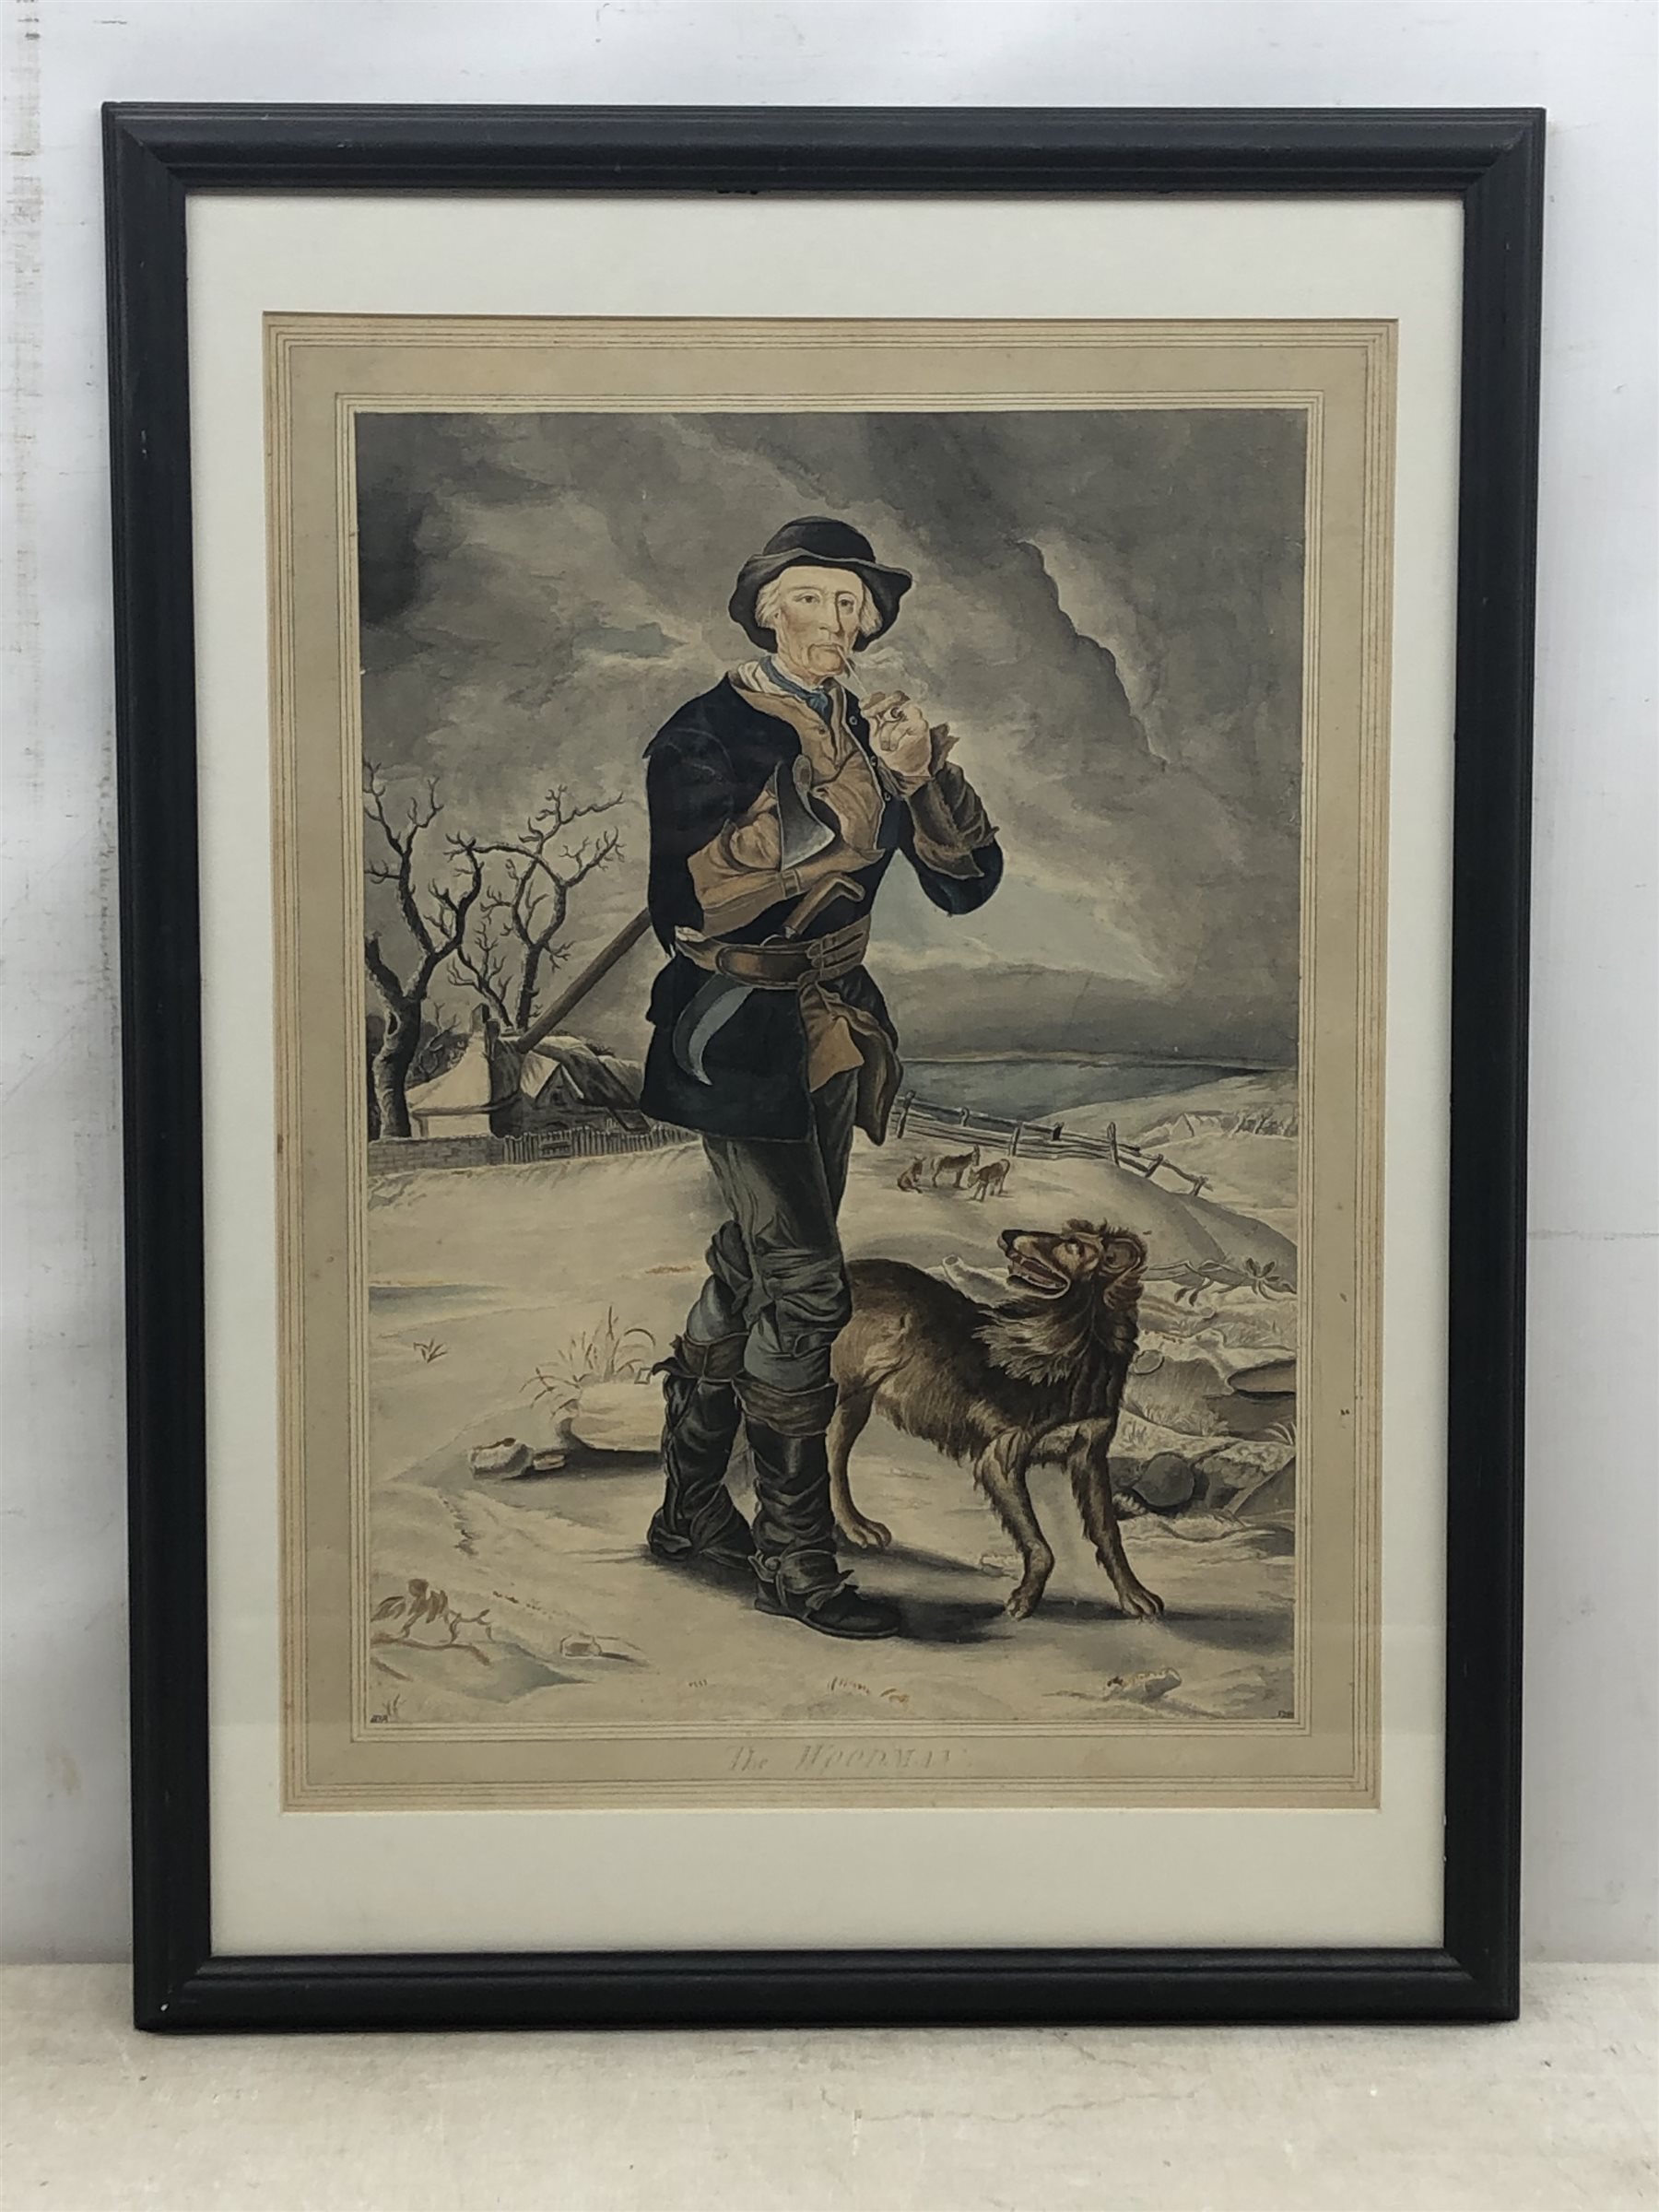 H D B after Thomas Barker (British 1769-1847): 'The Woodman', watercolour signed with monogram HDB a - Image 2 of 2